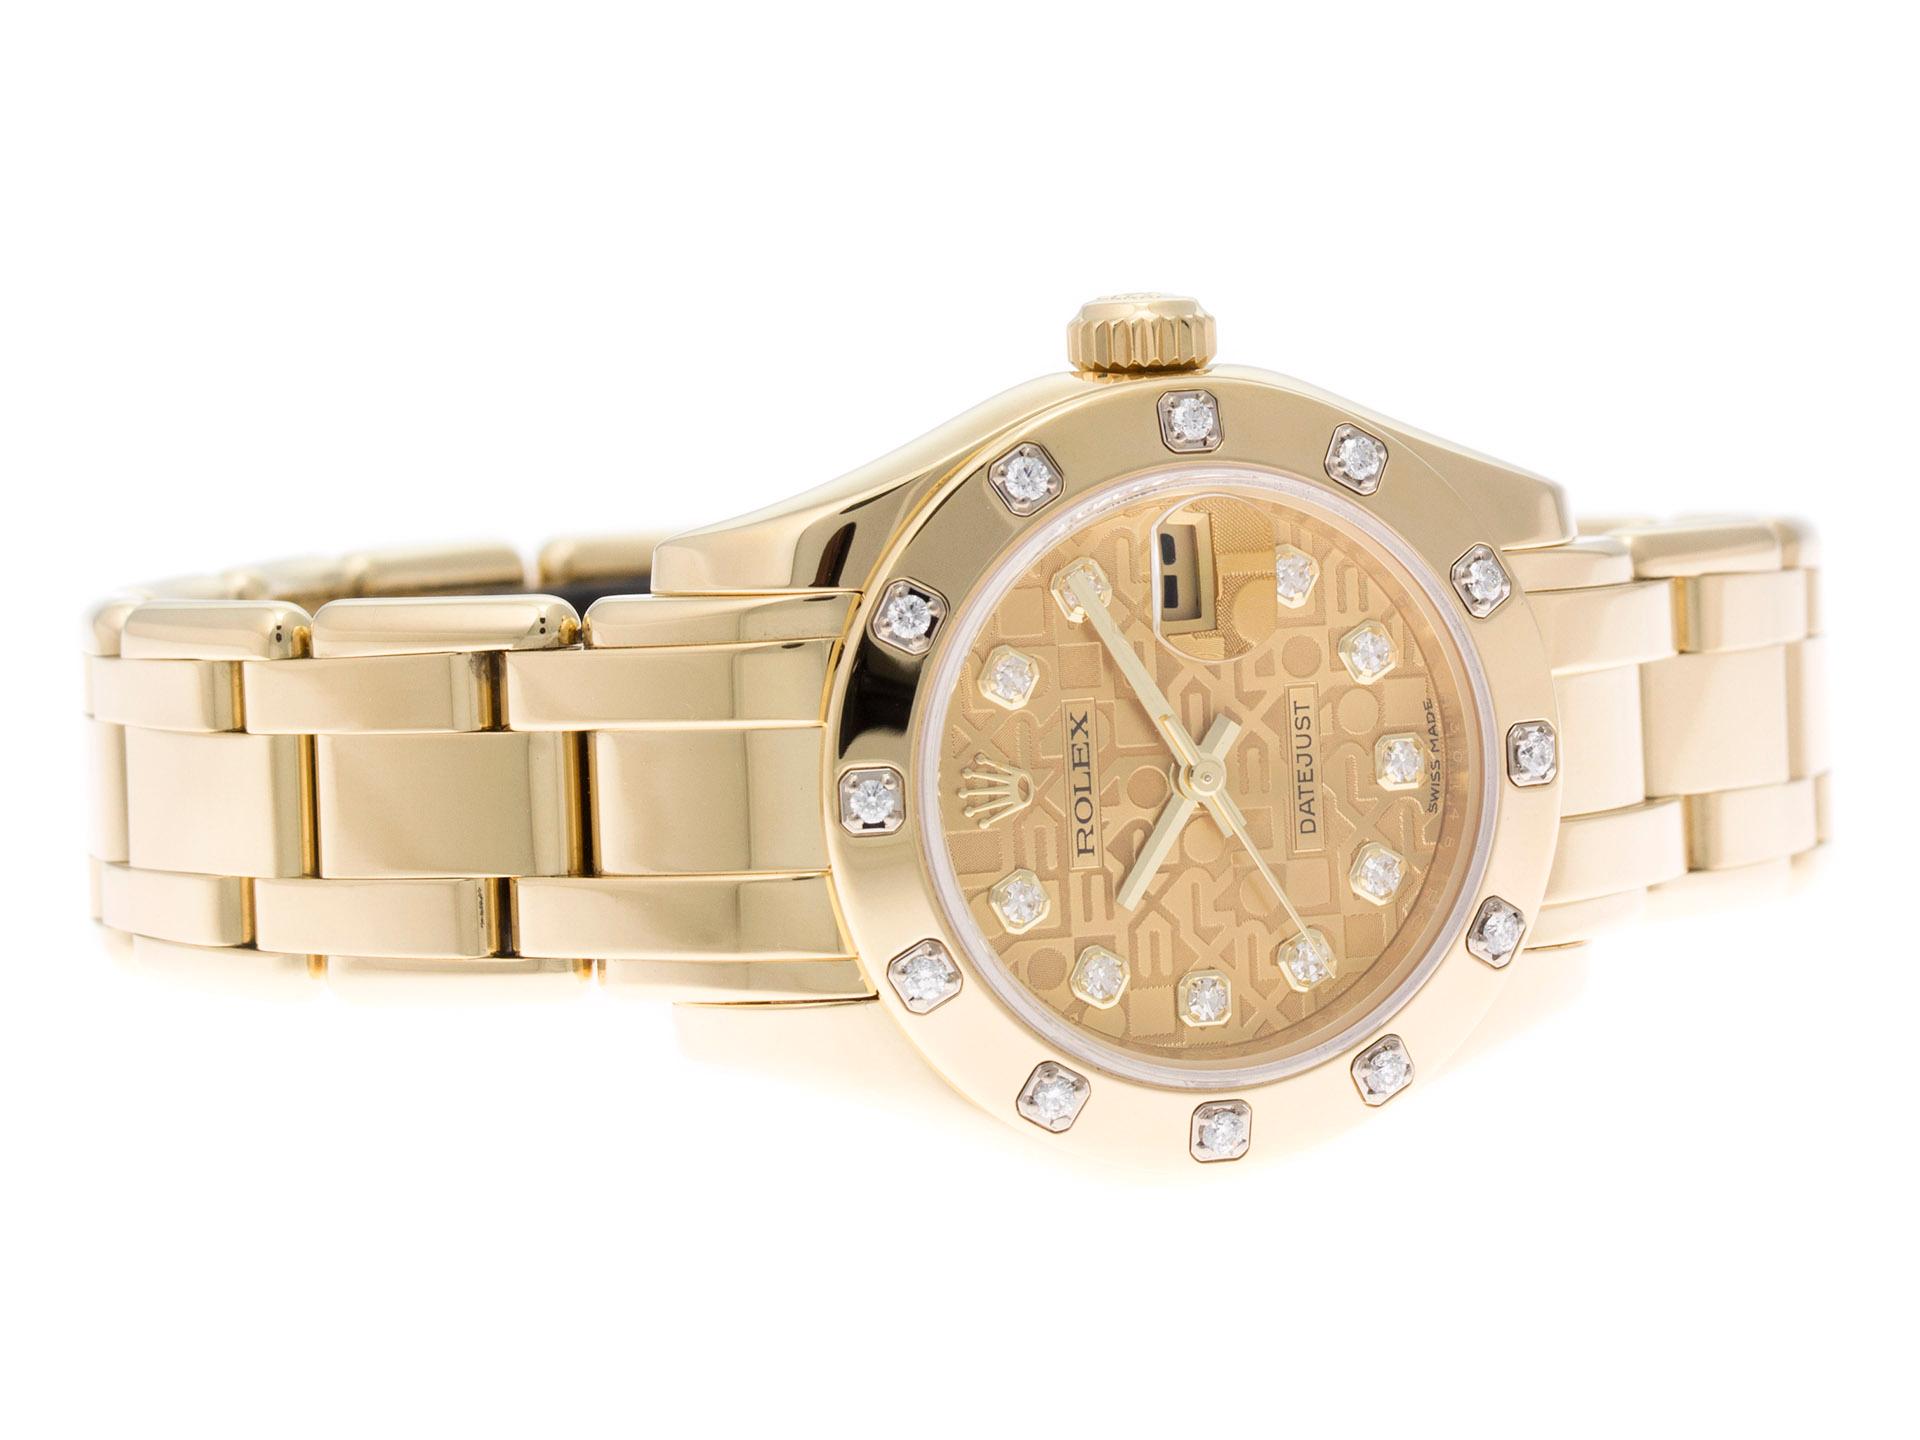 18K Yellow Gold Rolex Datejust Pearlmaster 80318 watch, water resistant to 100m, with jubilee diamond dial and bracelet.

Watch	
Brand:	Rolex
Series:	Datejust Pearlmaster
Model #:	80318-72948
Gender:	Ladies’
Condition:	Excellent Display Model, Faint